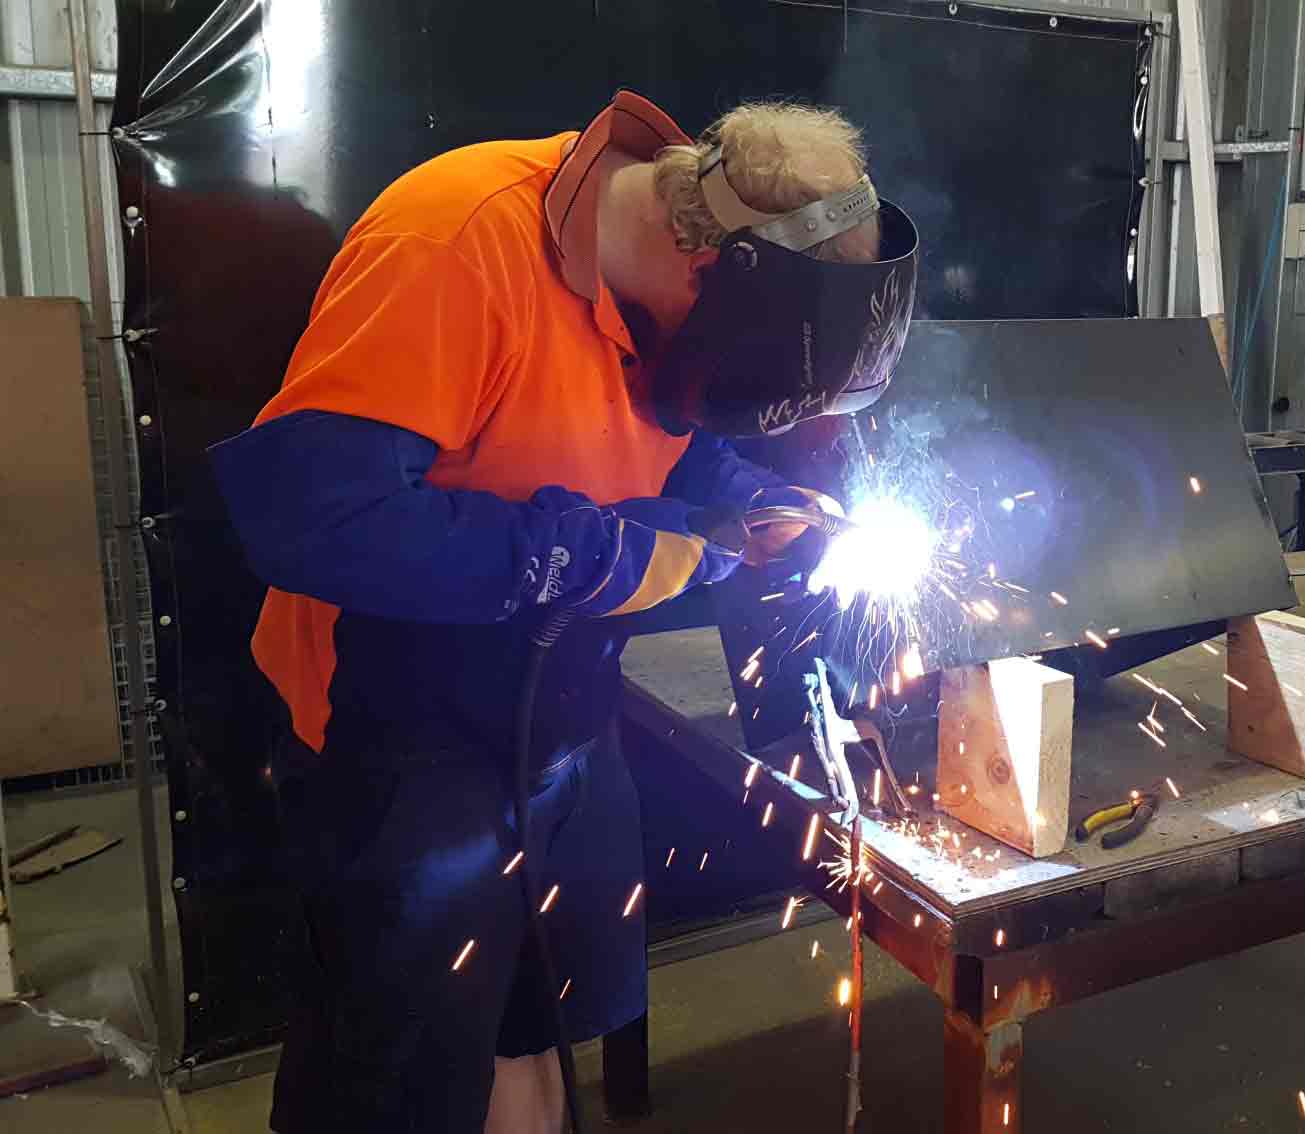 Man welding metal with protective face cover on.